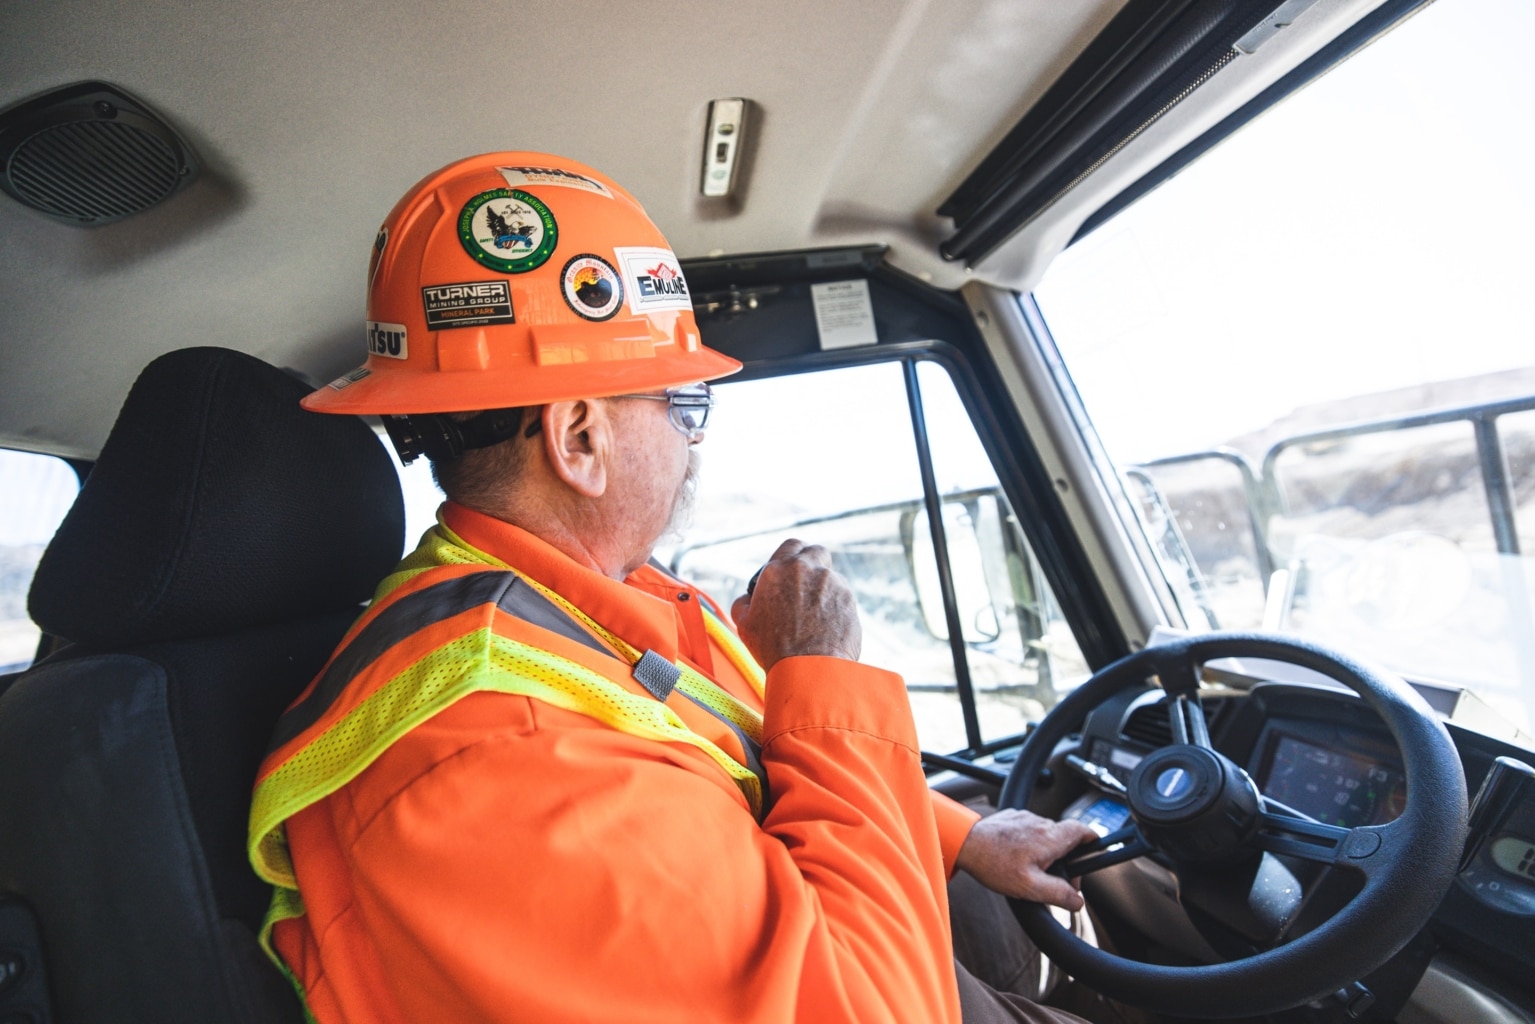 Construction worker sitting in cabin of a vehicle